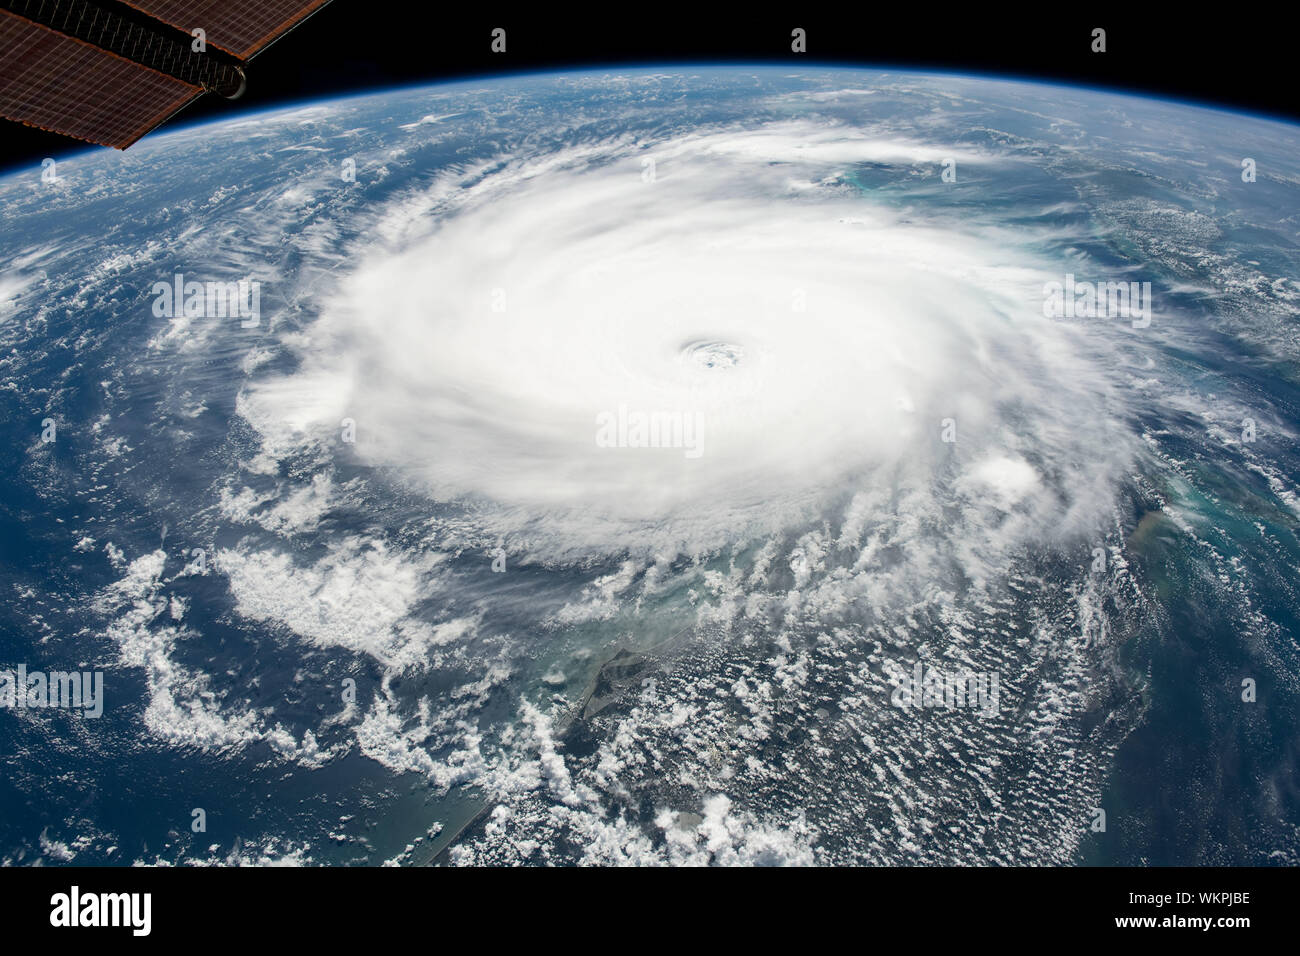 International Space Station. 02 September, 2019. Cyclonic clouds of Hurricane Dorian seen from the International Space Station as it moves toward the coast of Florida September 2, 2019 in the Atlantic Ocean. The current forecast calls for Dorian to strengthen over open water to a Category 4 with winds of 140 mph before making landfall in South Florida late Monday.  Credit: NASA/Planetpix/Alamy Live News Stock Photo